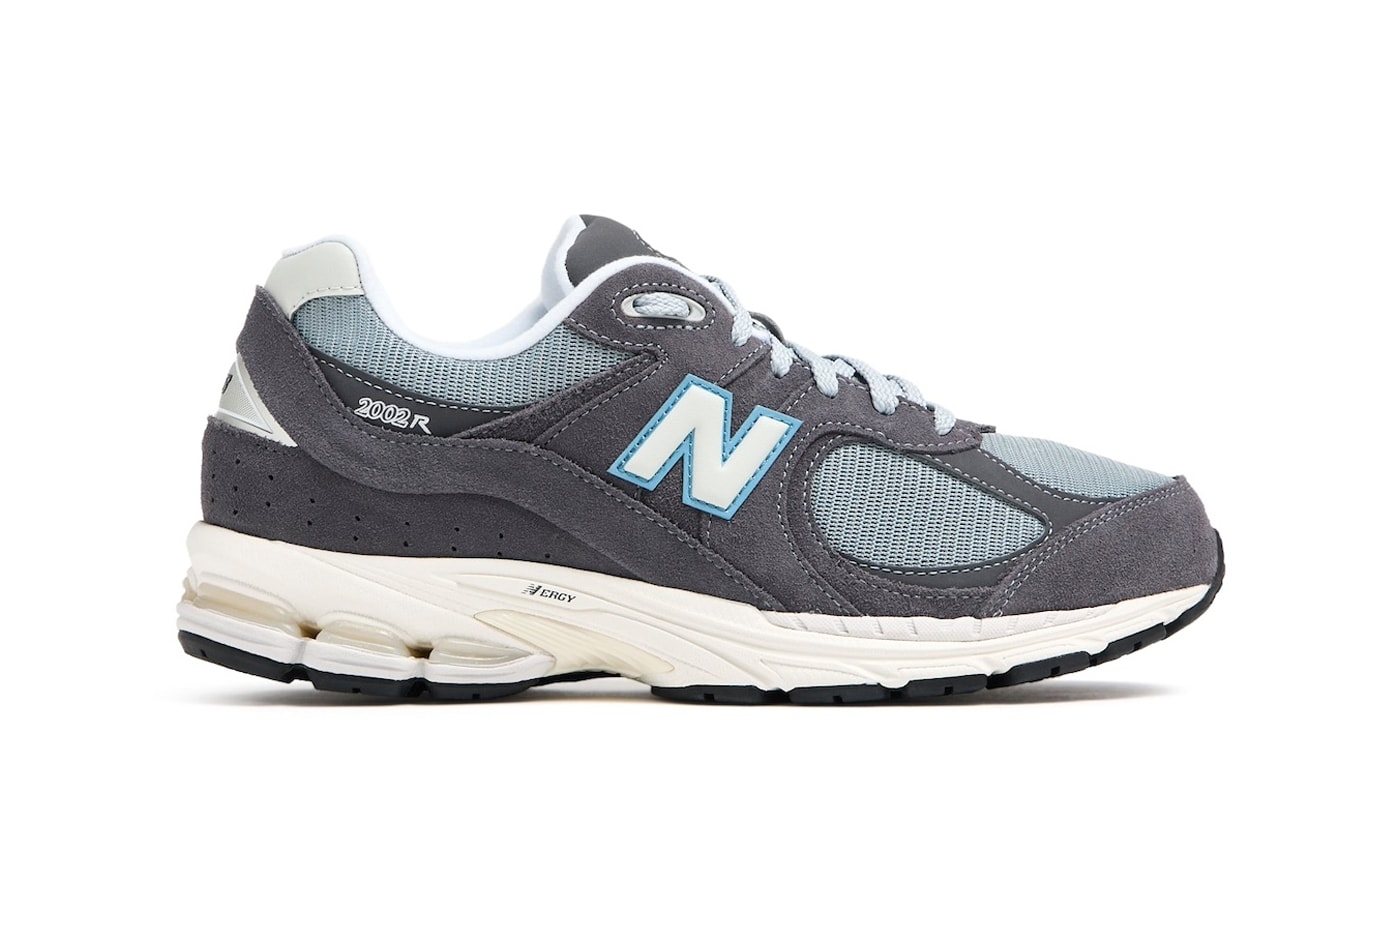 New Balance 2002R Surfaces in "Steel Blue" M2002RFB Magnet/Steel Blue running shoes sneakers everyday nb